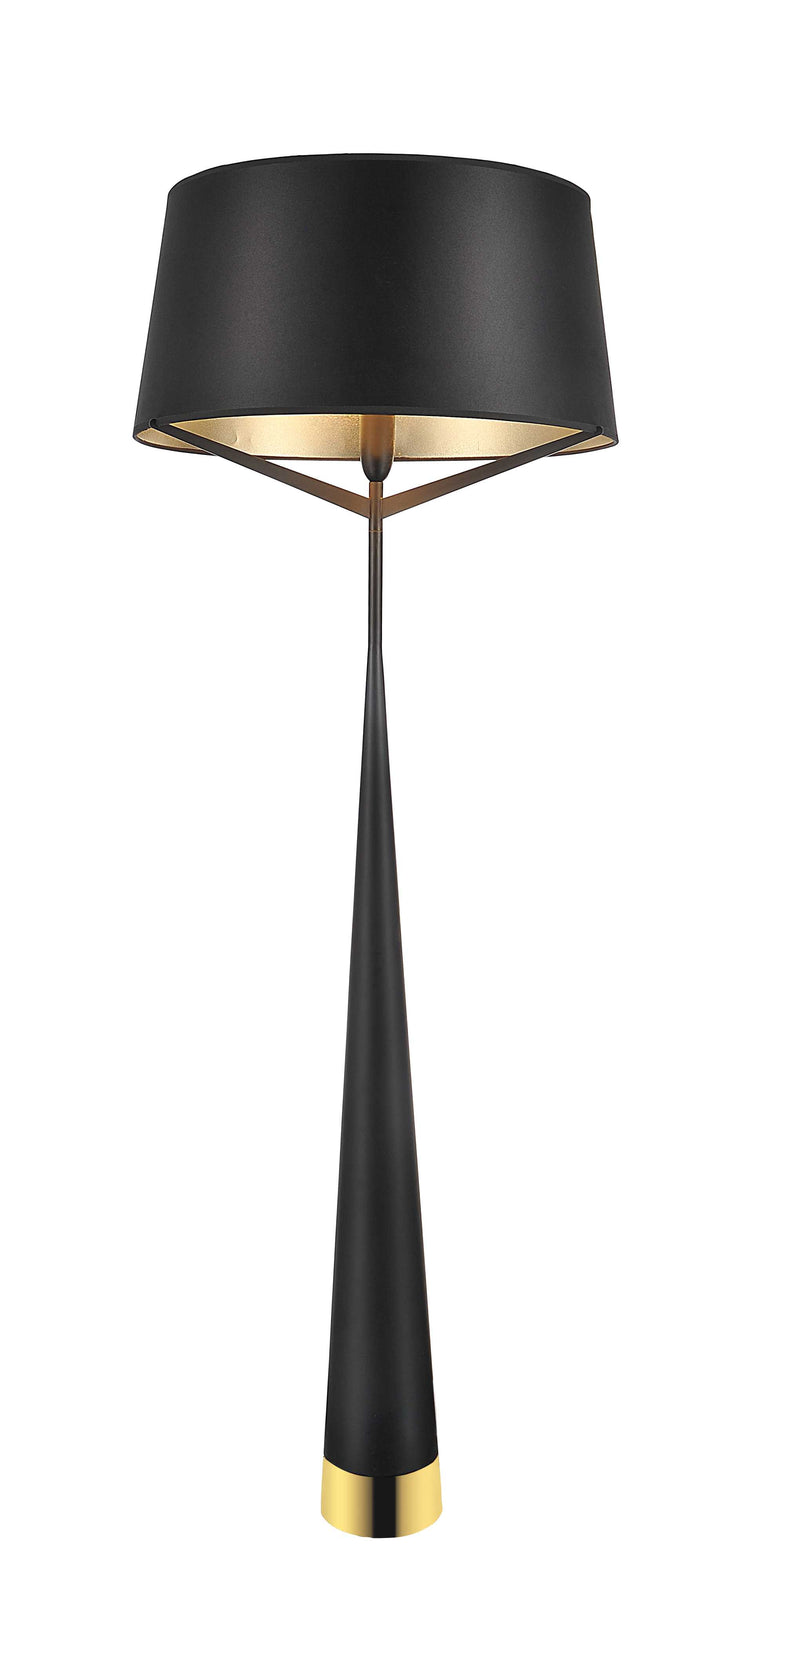 Home Outfitters 24 X 24 X 67 Black Steel Floor Lamp